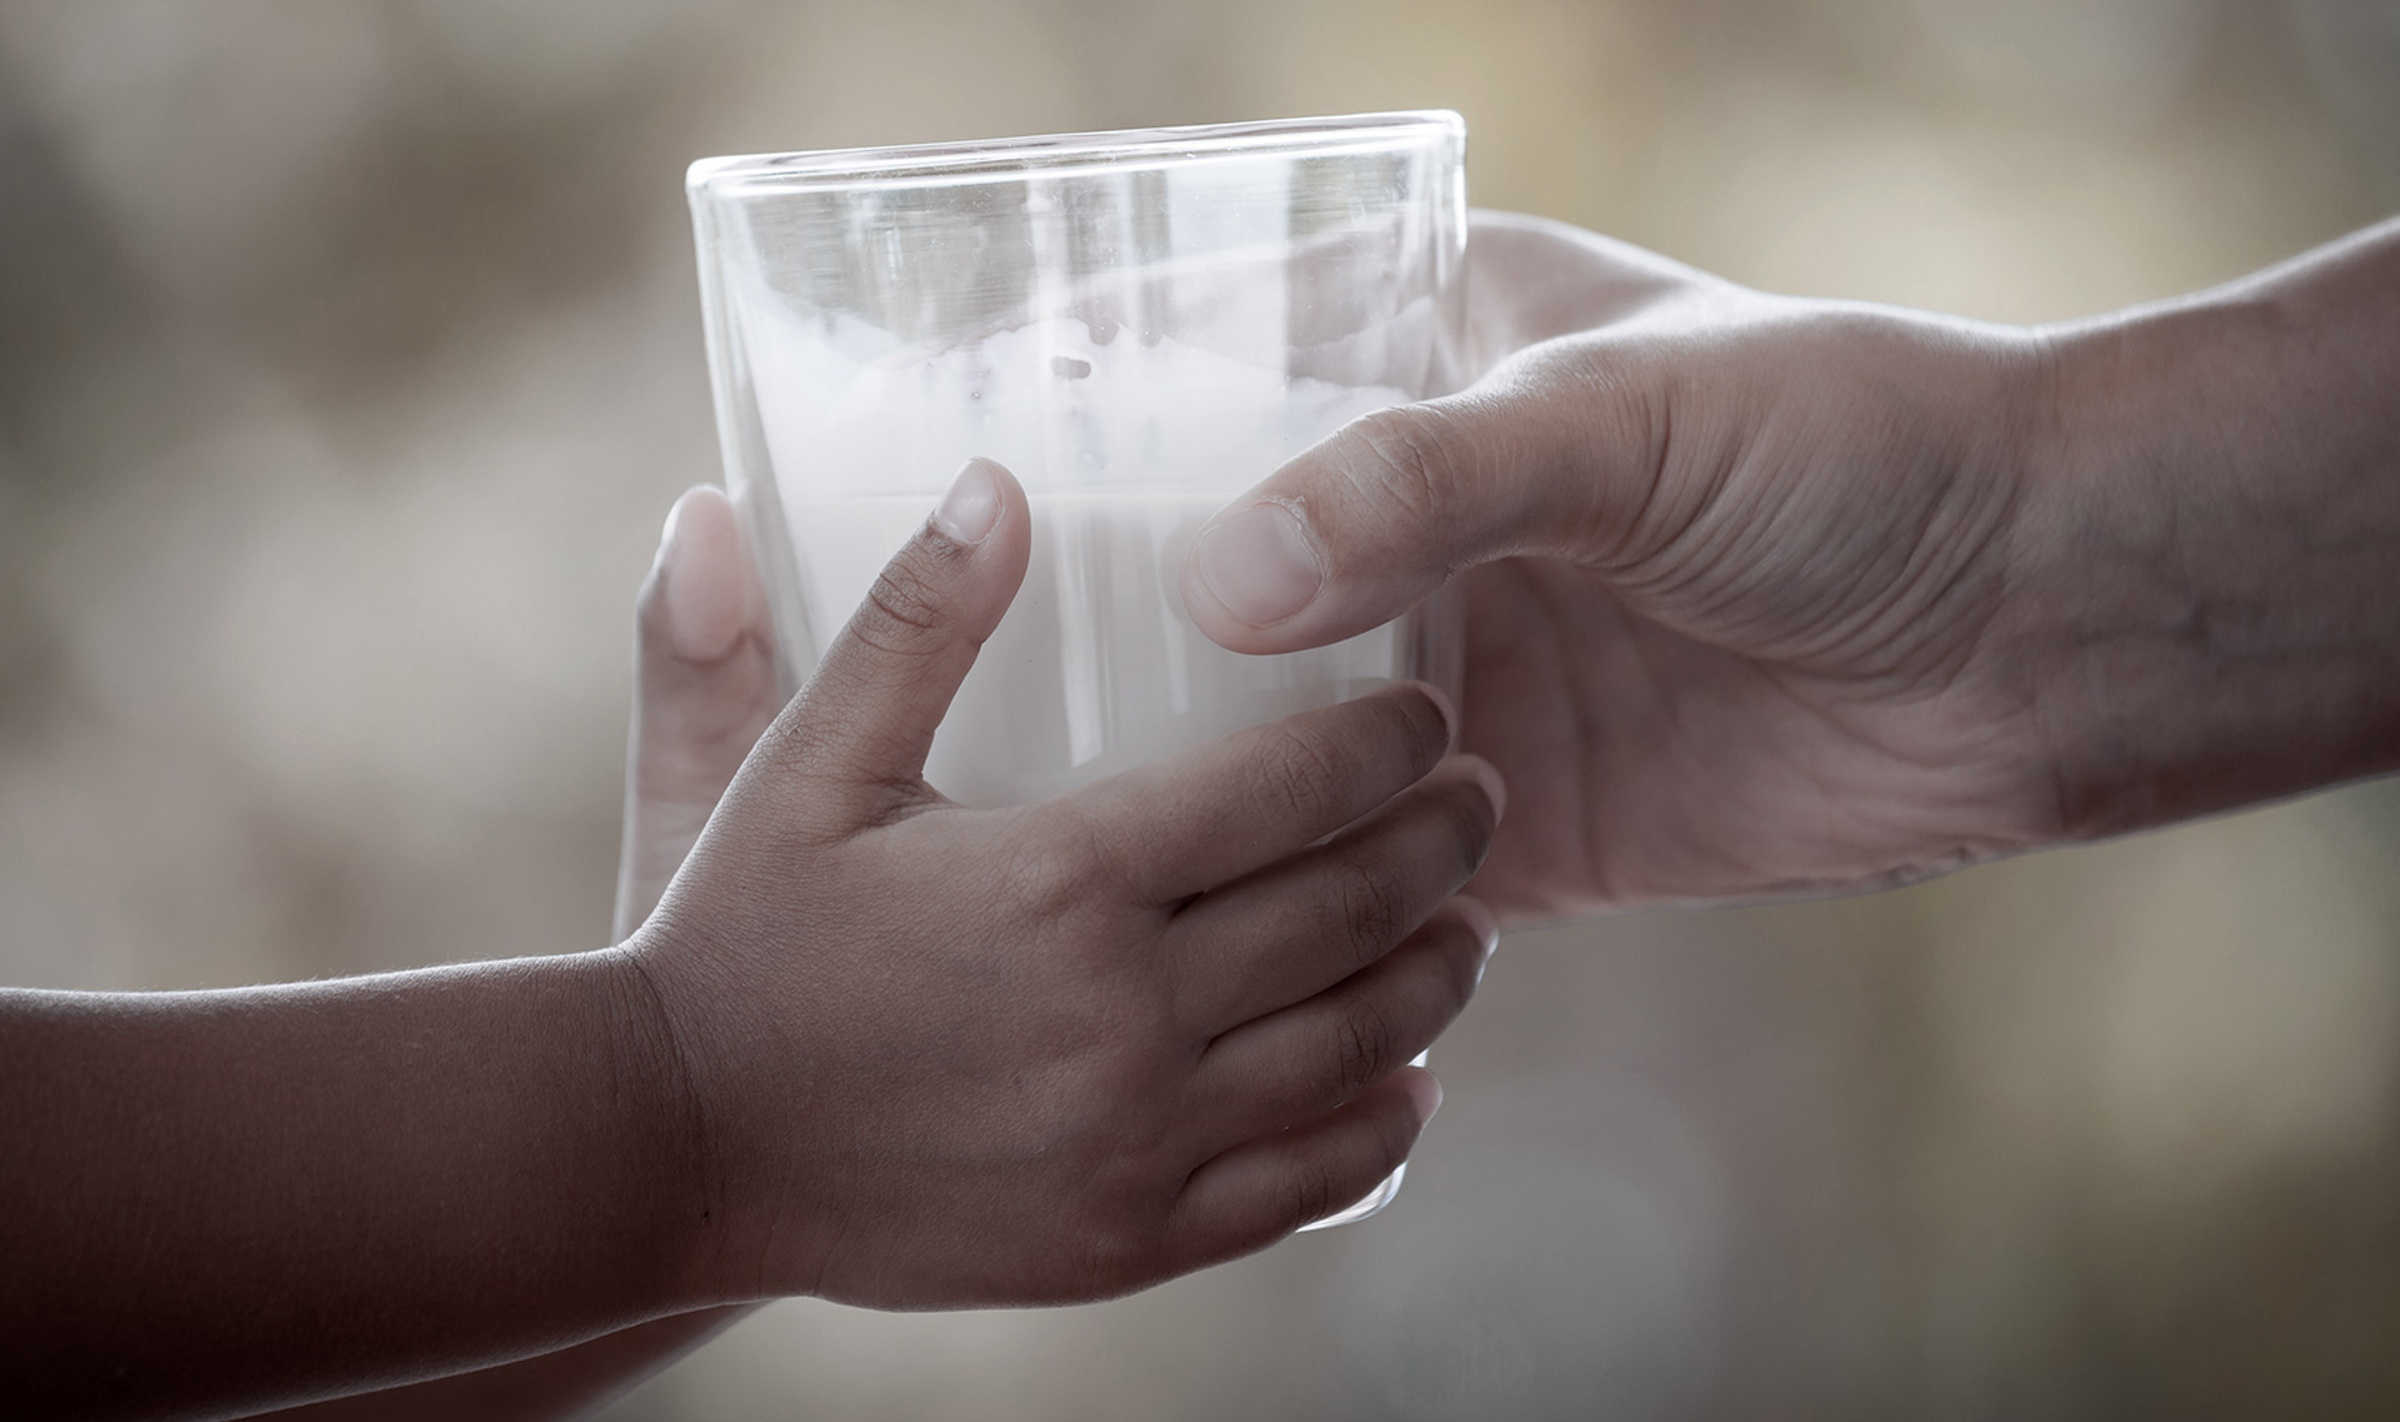 the hands of a child receiving a glass of milk from an adults hand